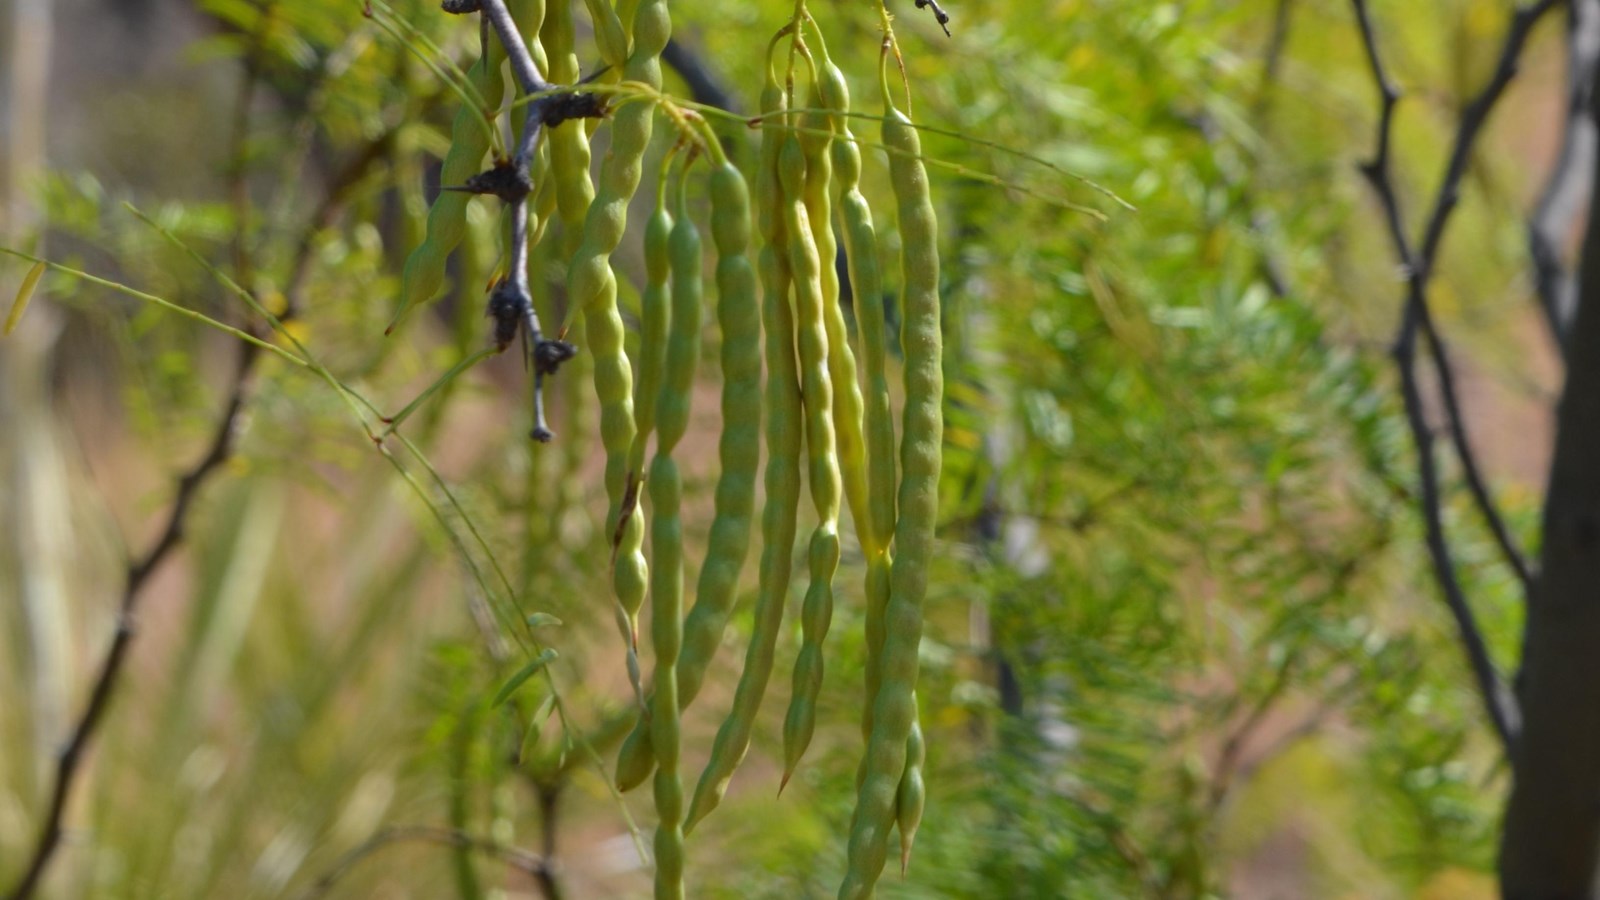 A cluster of young, green seed pods hang from a branch of a mesquite tree.